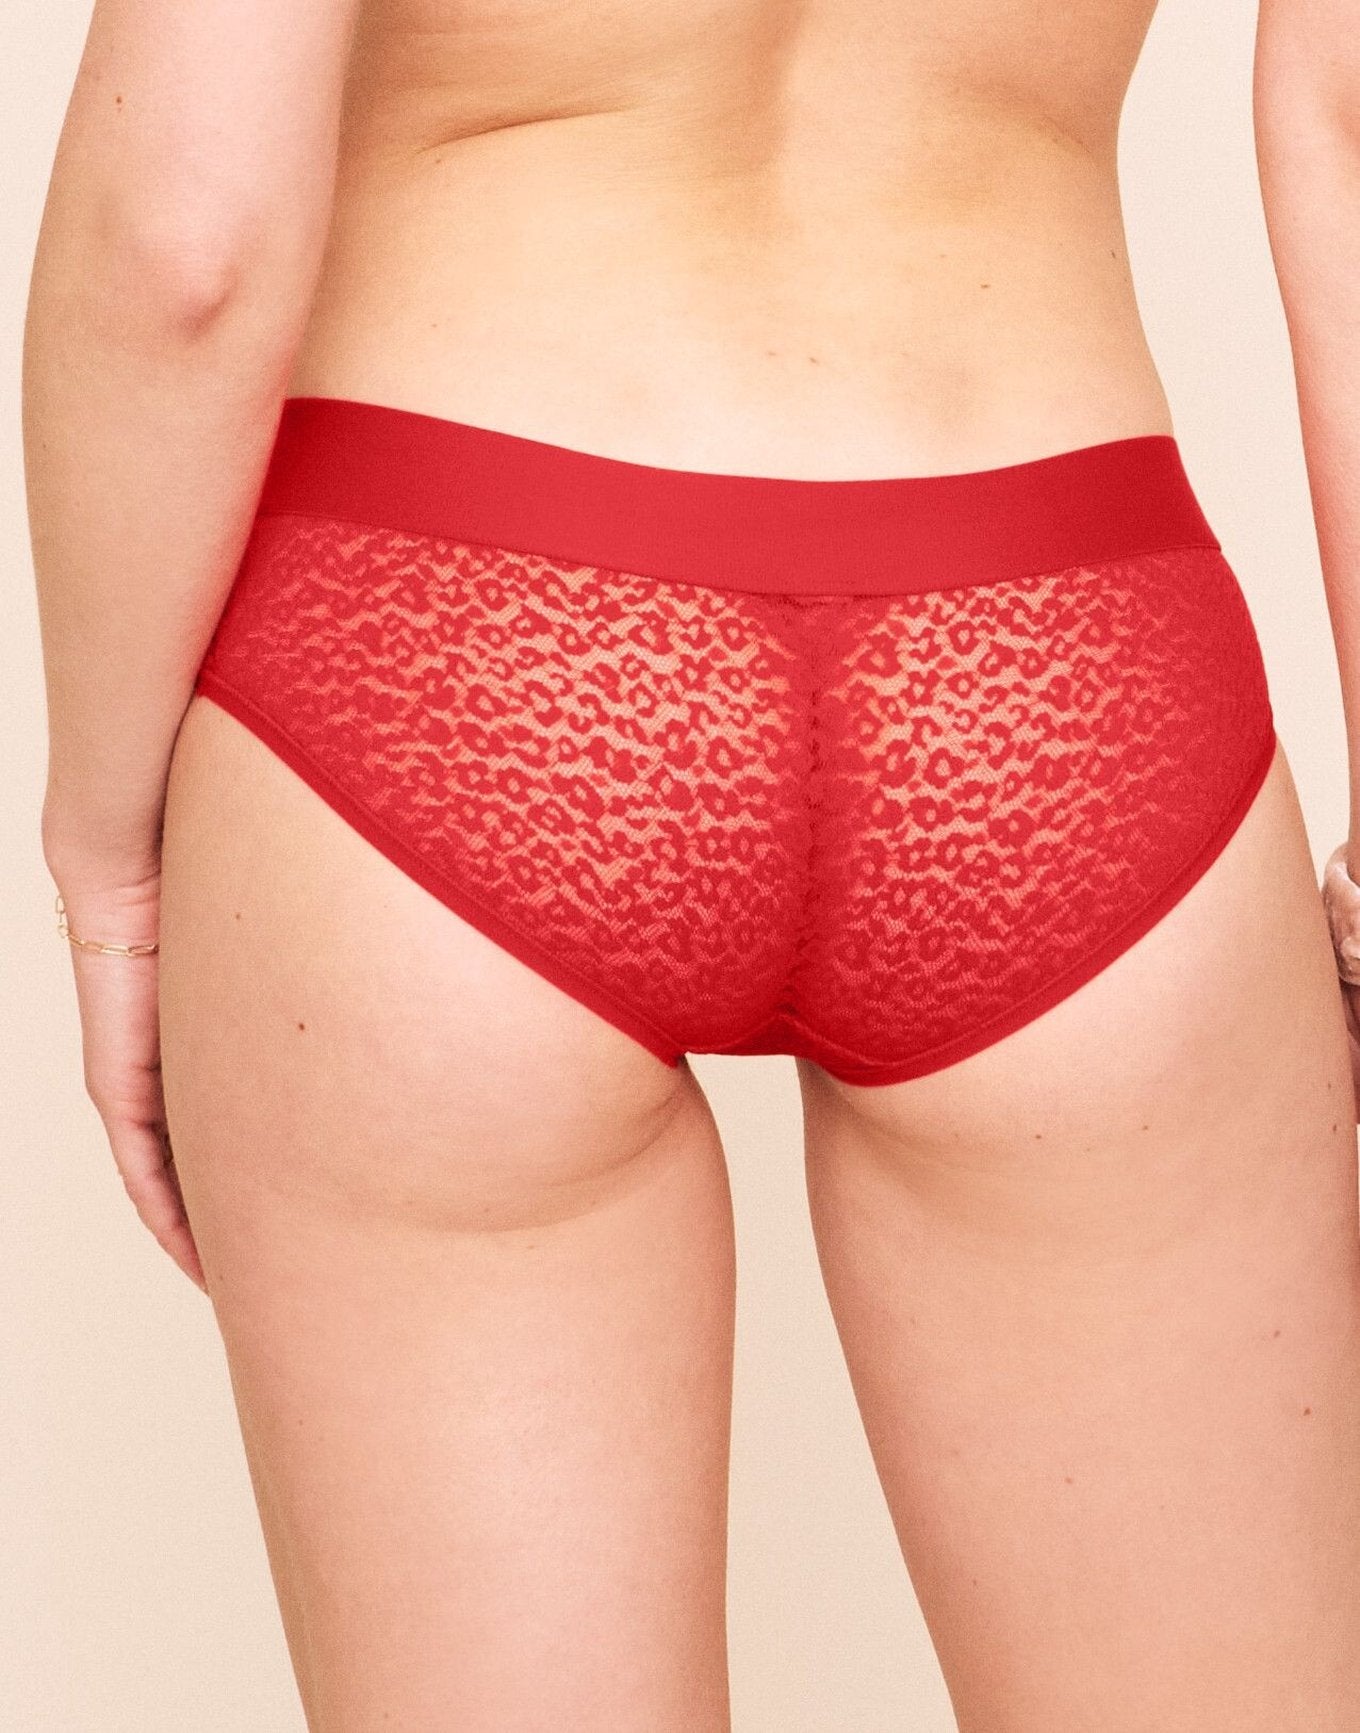 Earth Republic James Lace Lace Hipster in color Flame Scarlet and shape hipster